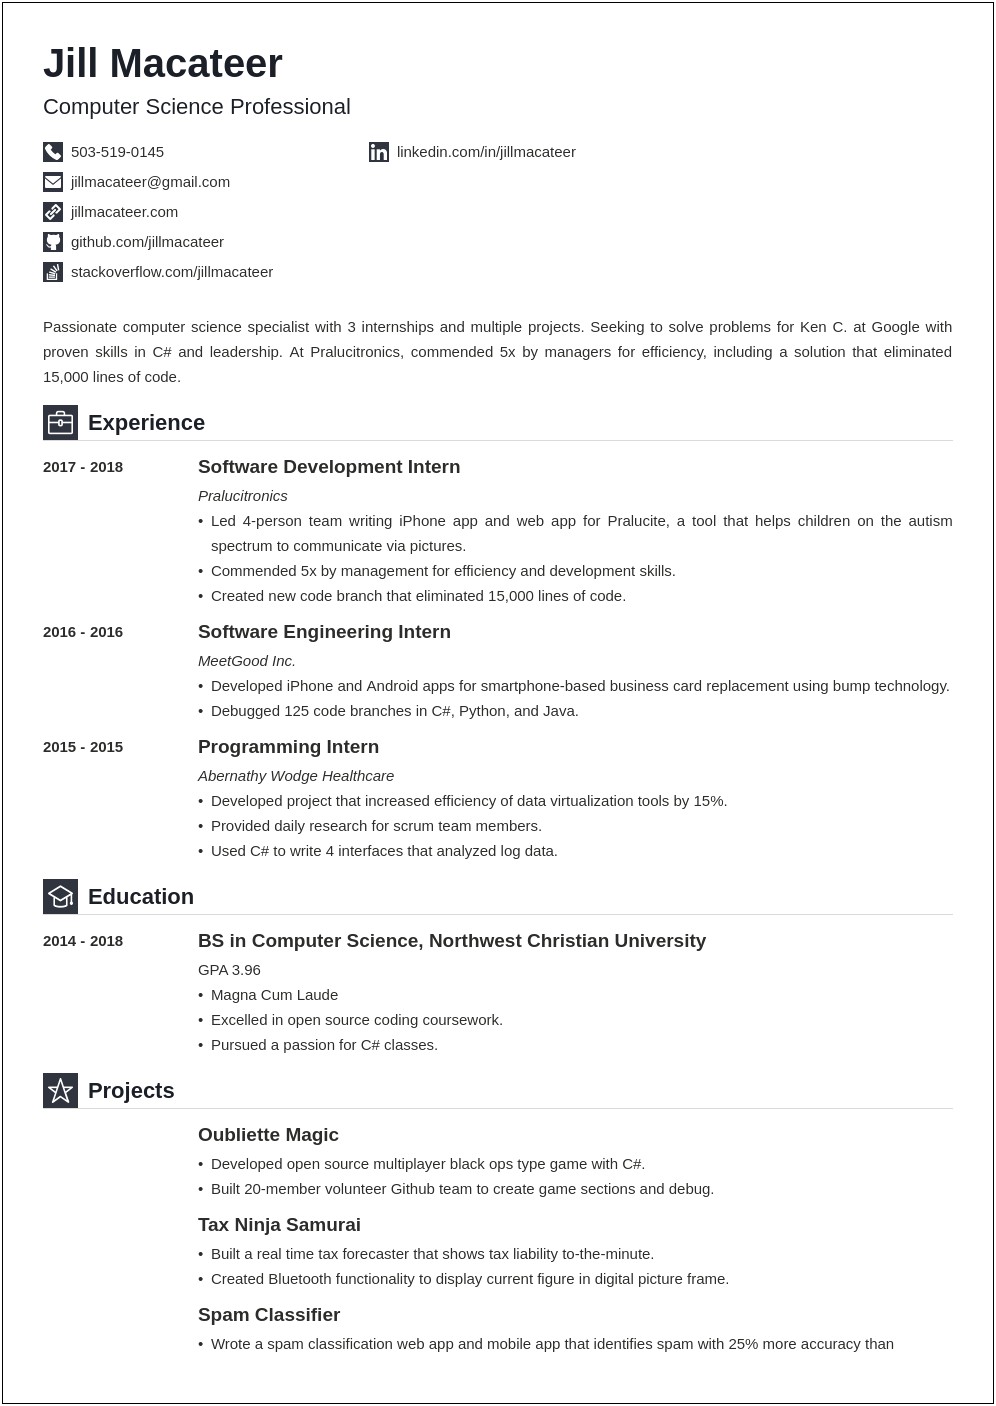 Examples Of Good Entry Level Computer Science Resumes